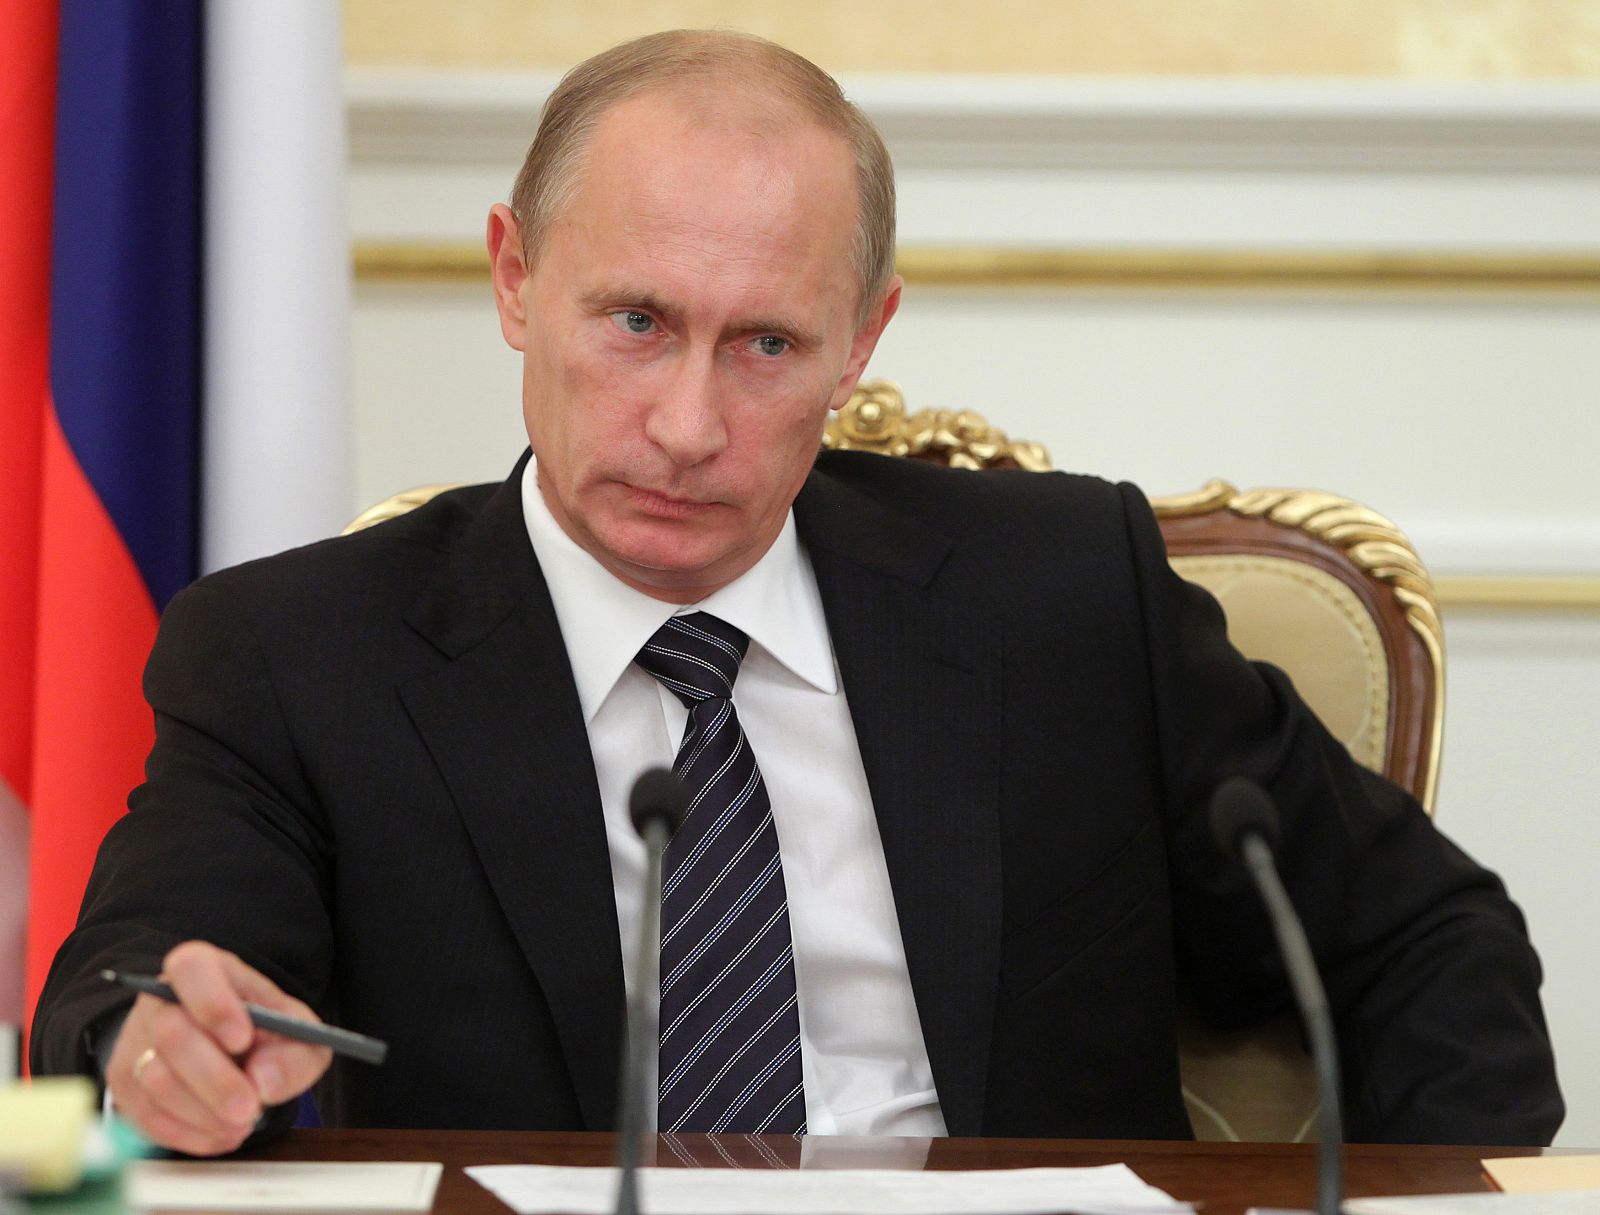 Russia's Prime Minister Putin chairs a government meeting in Moscow